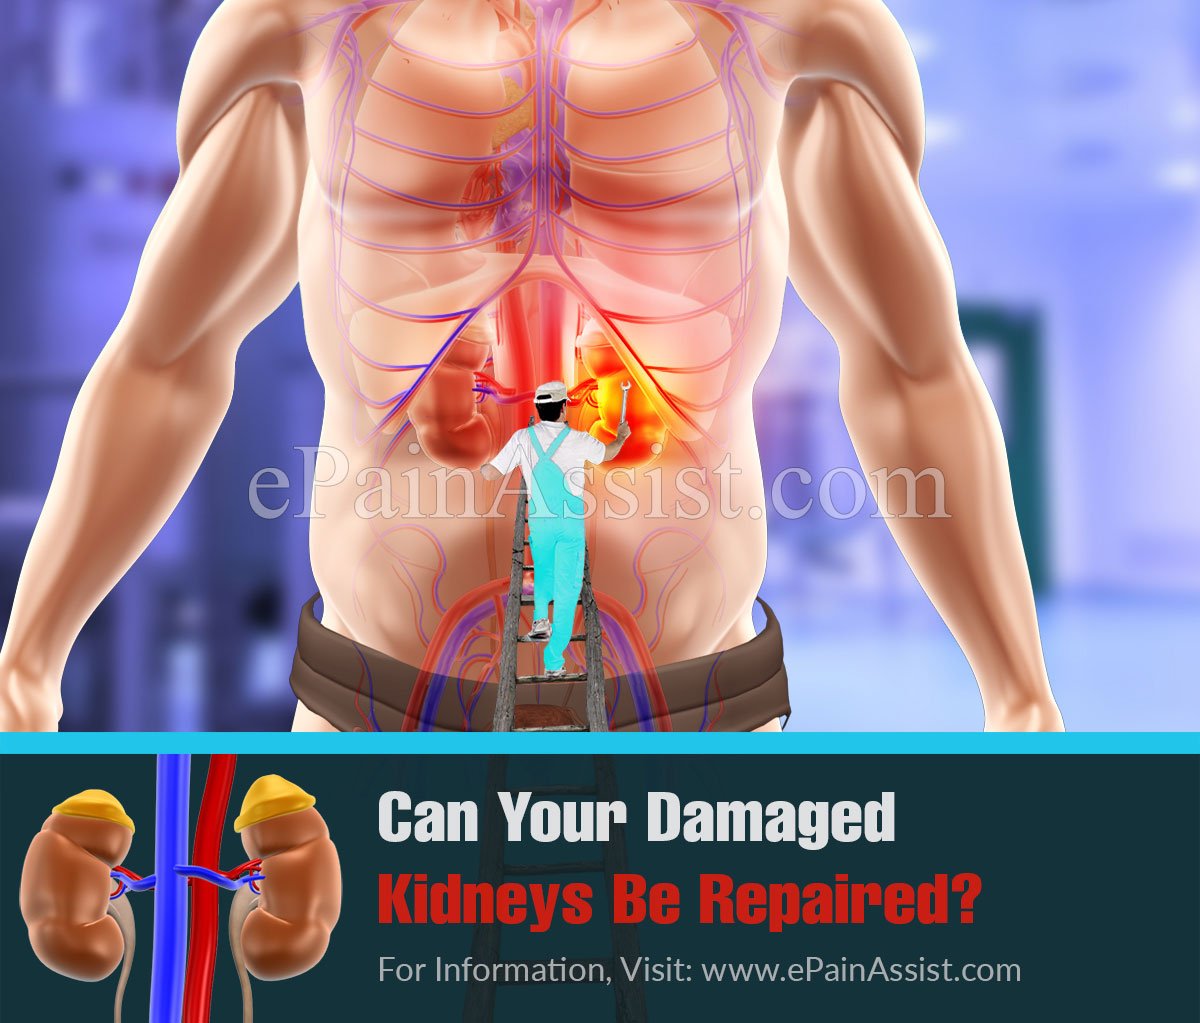 Can Your Damaged Kidneys Be Repaired?